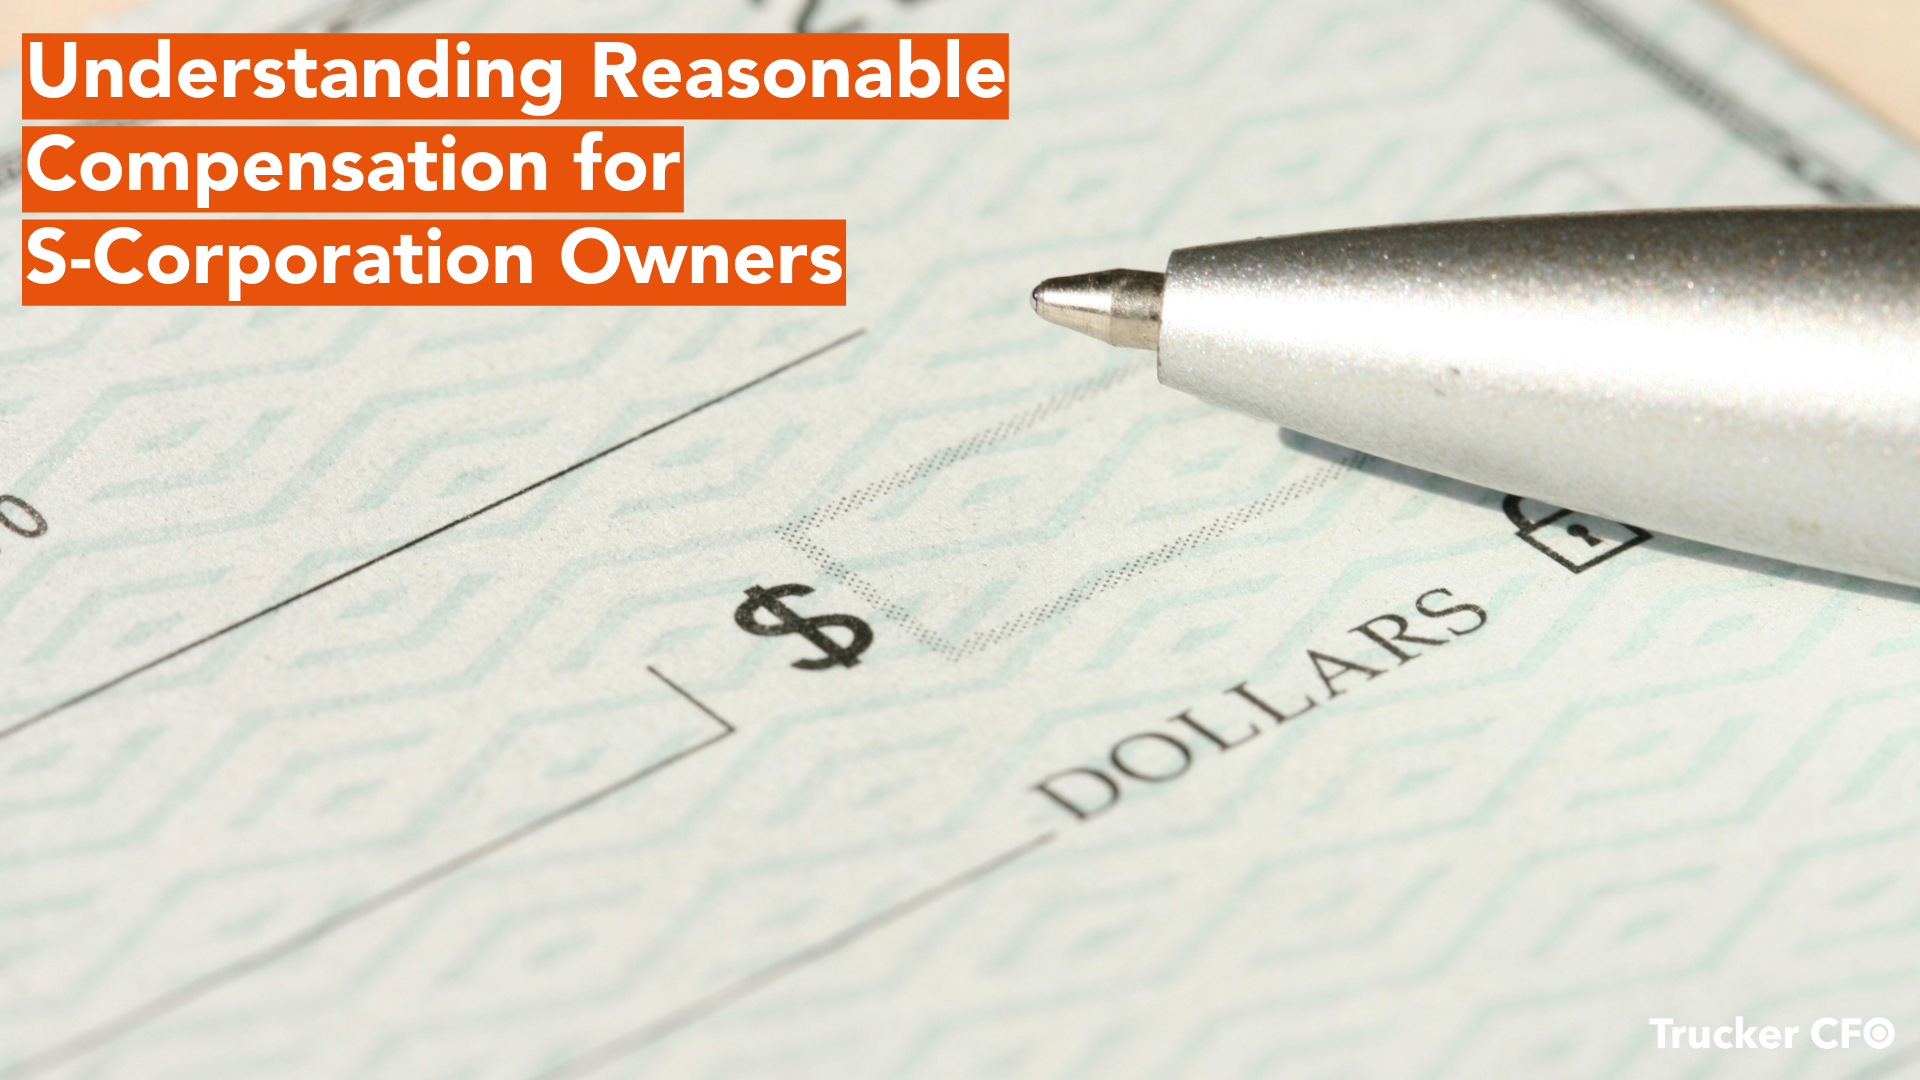 Reasonable Compensation for S-Corporation Owners